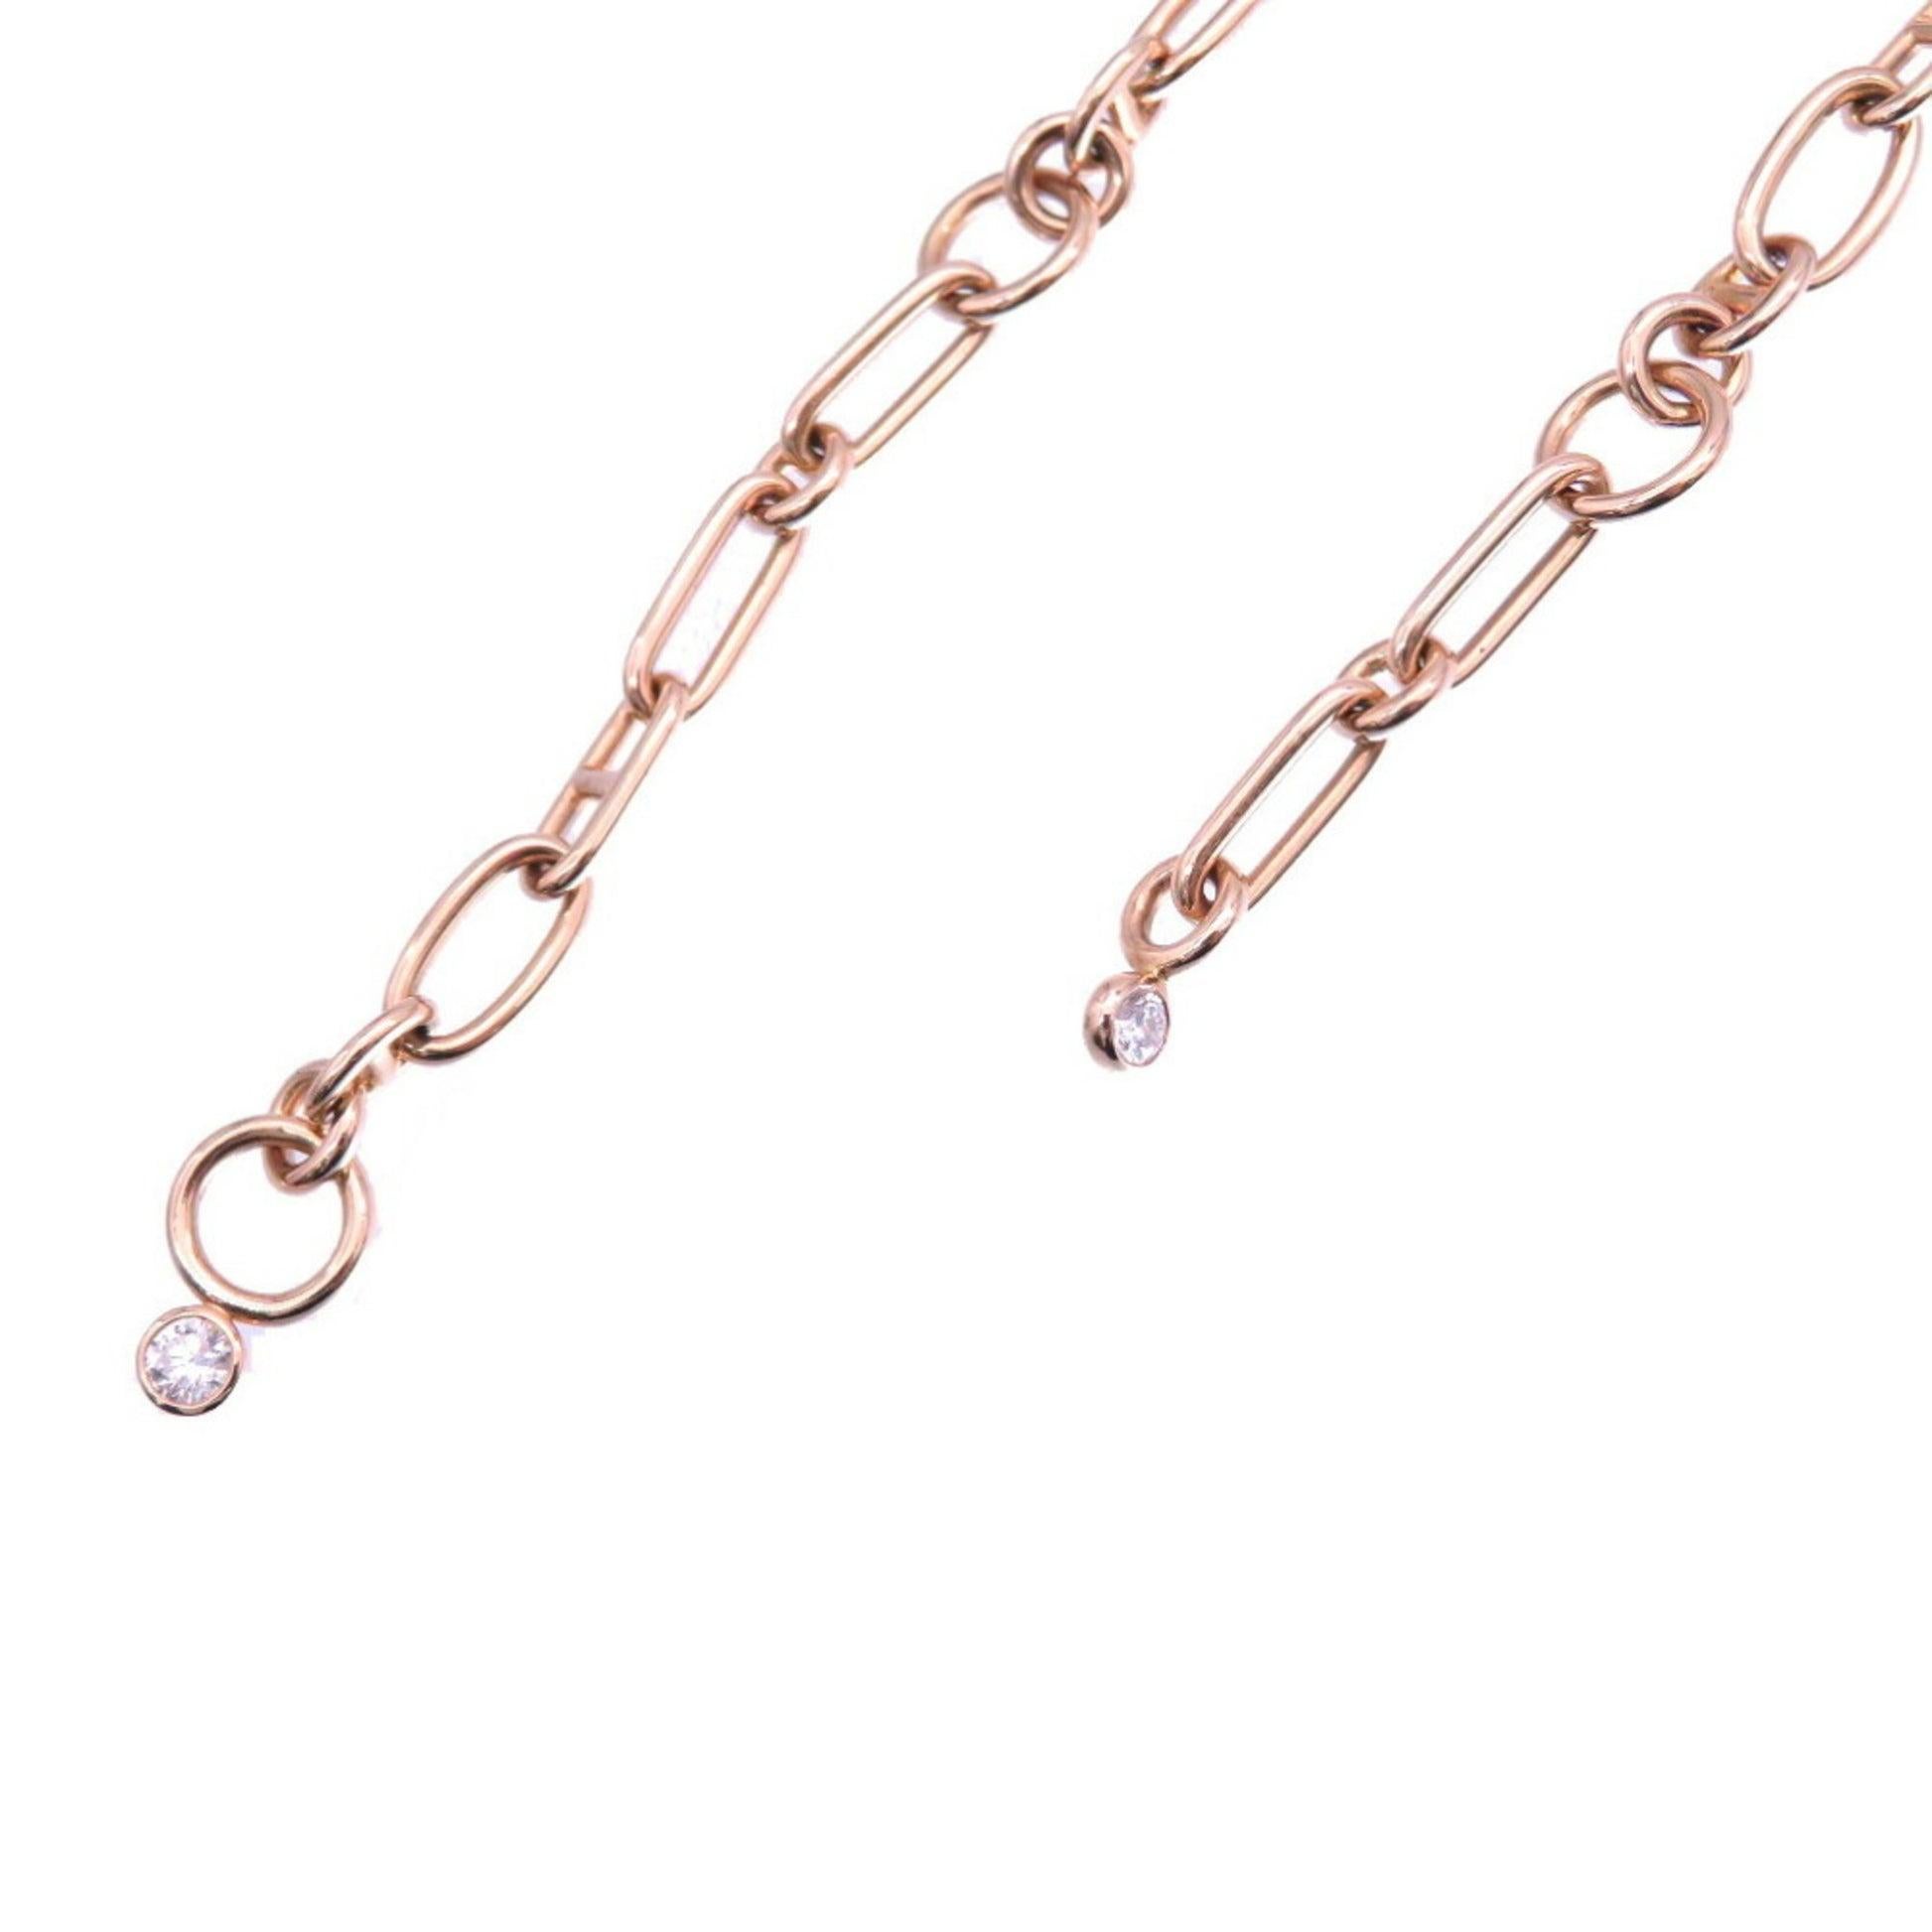 Women's Hermes 1.75ct Diamond Kelly Long Necklace in 18K Rose Gold and White Gold For Sale